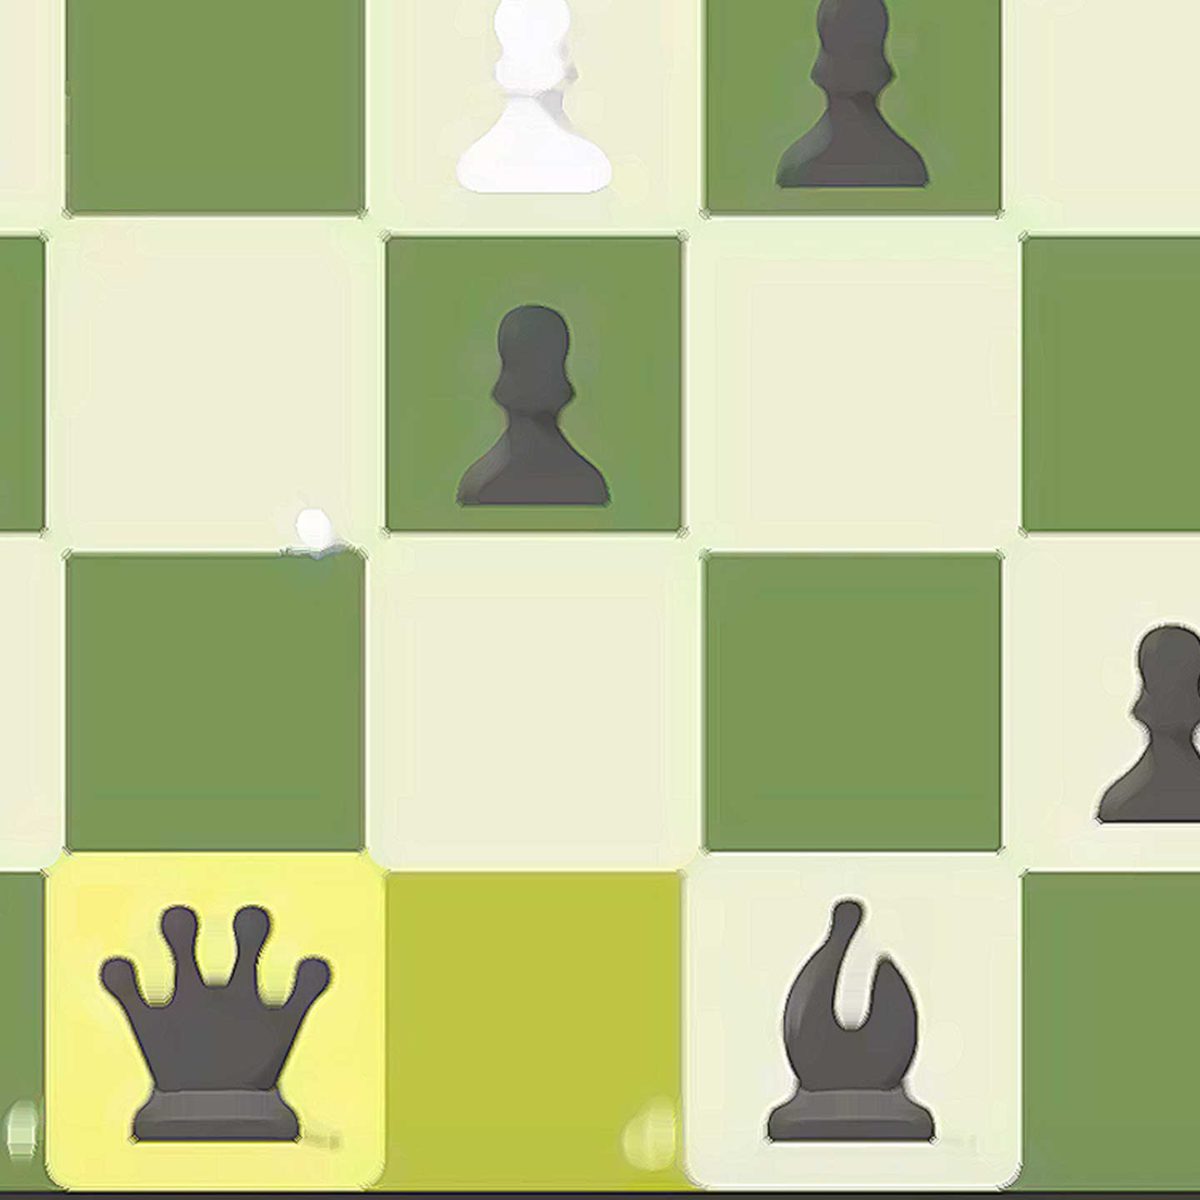 all chess pieces moves